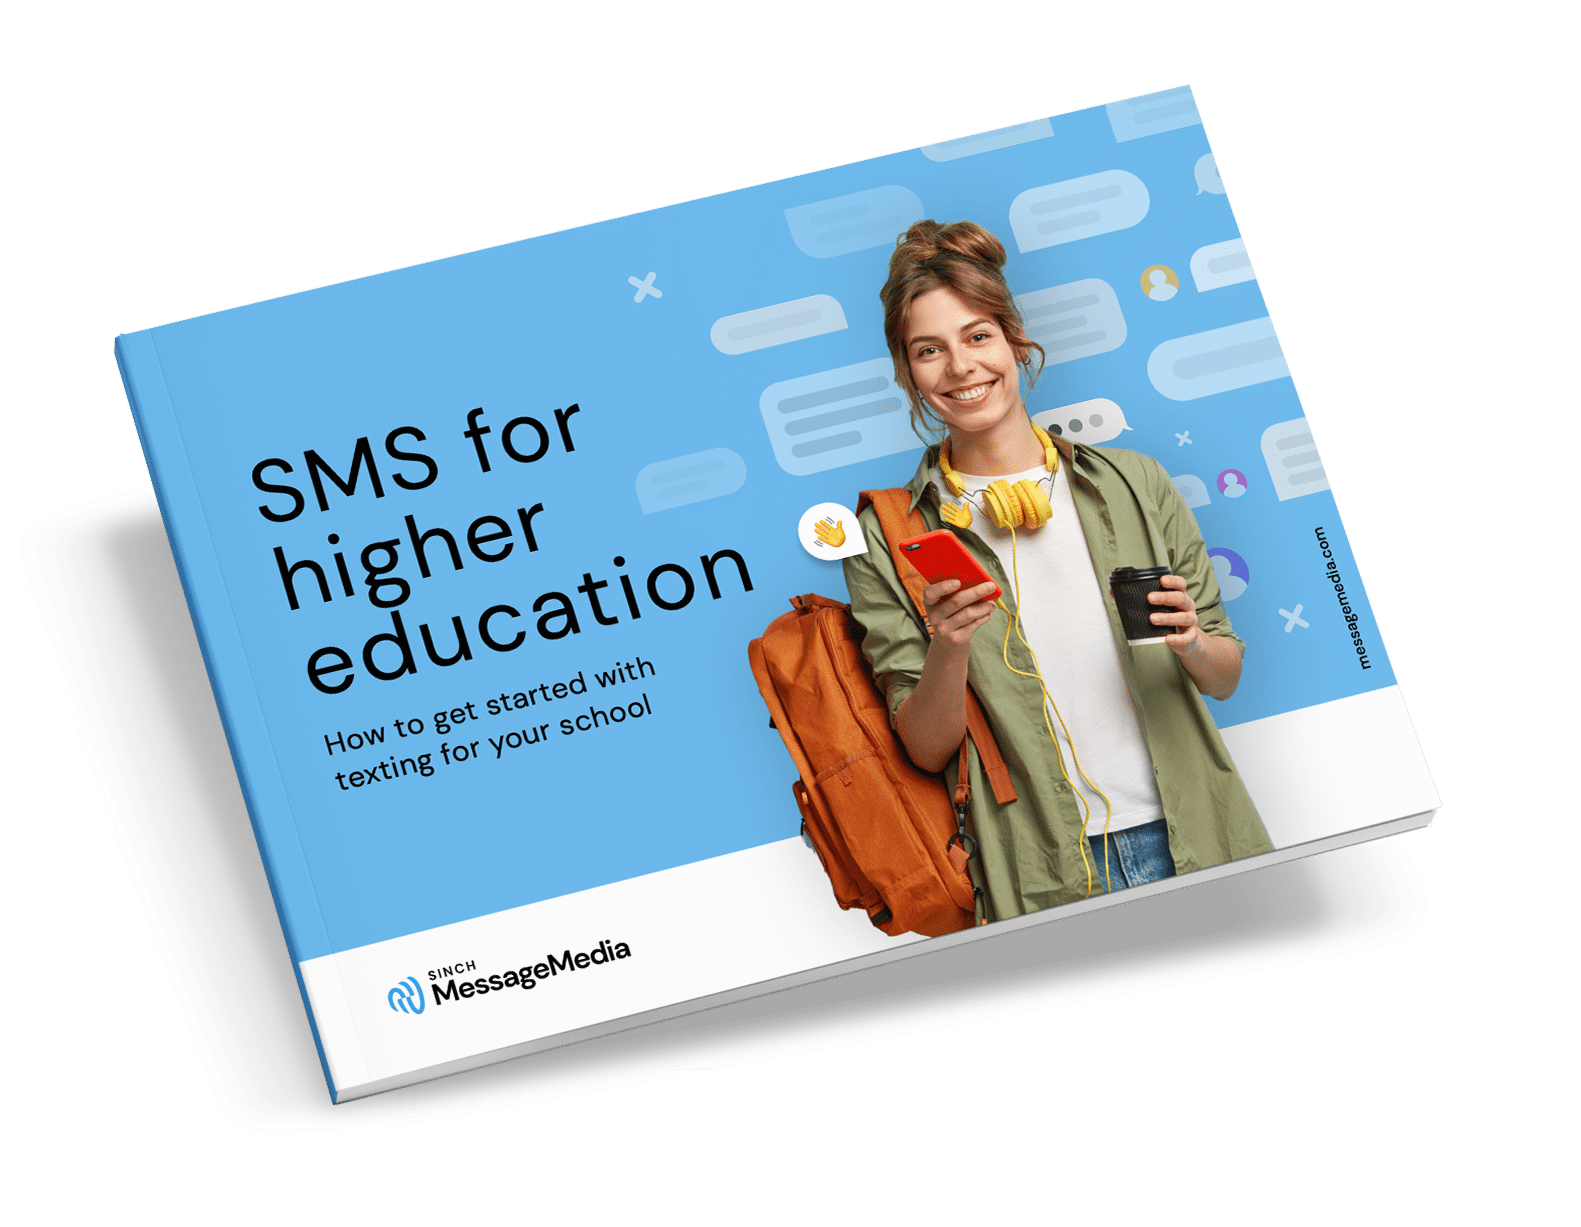 Image for SMS for higher education: How to get started with texting for your school